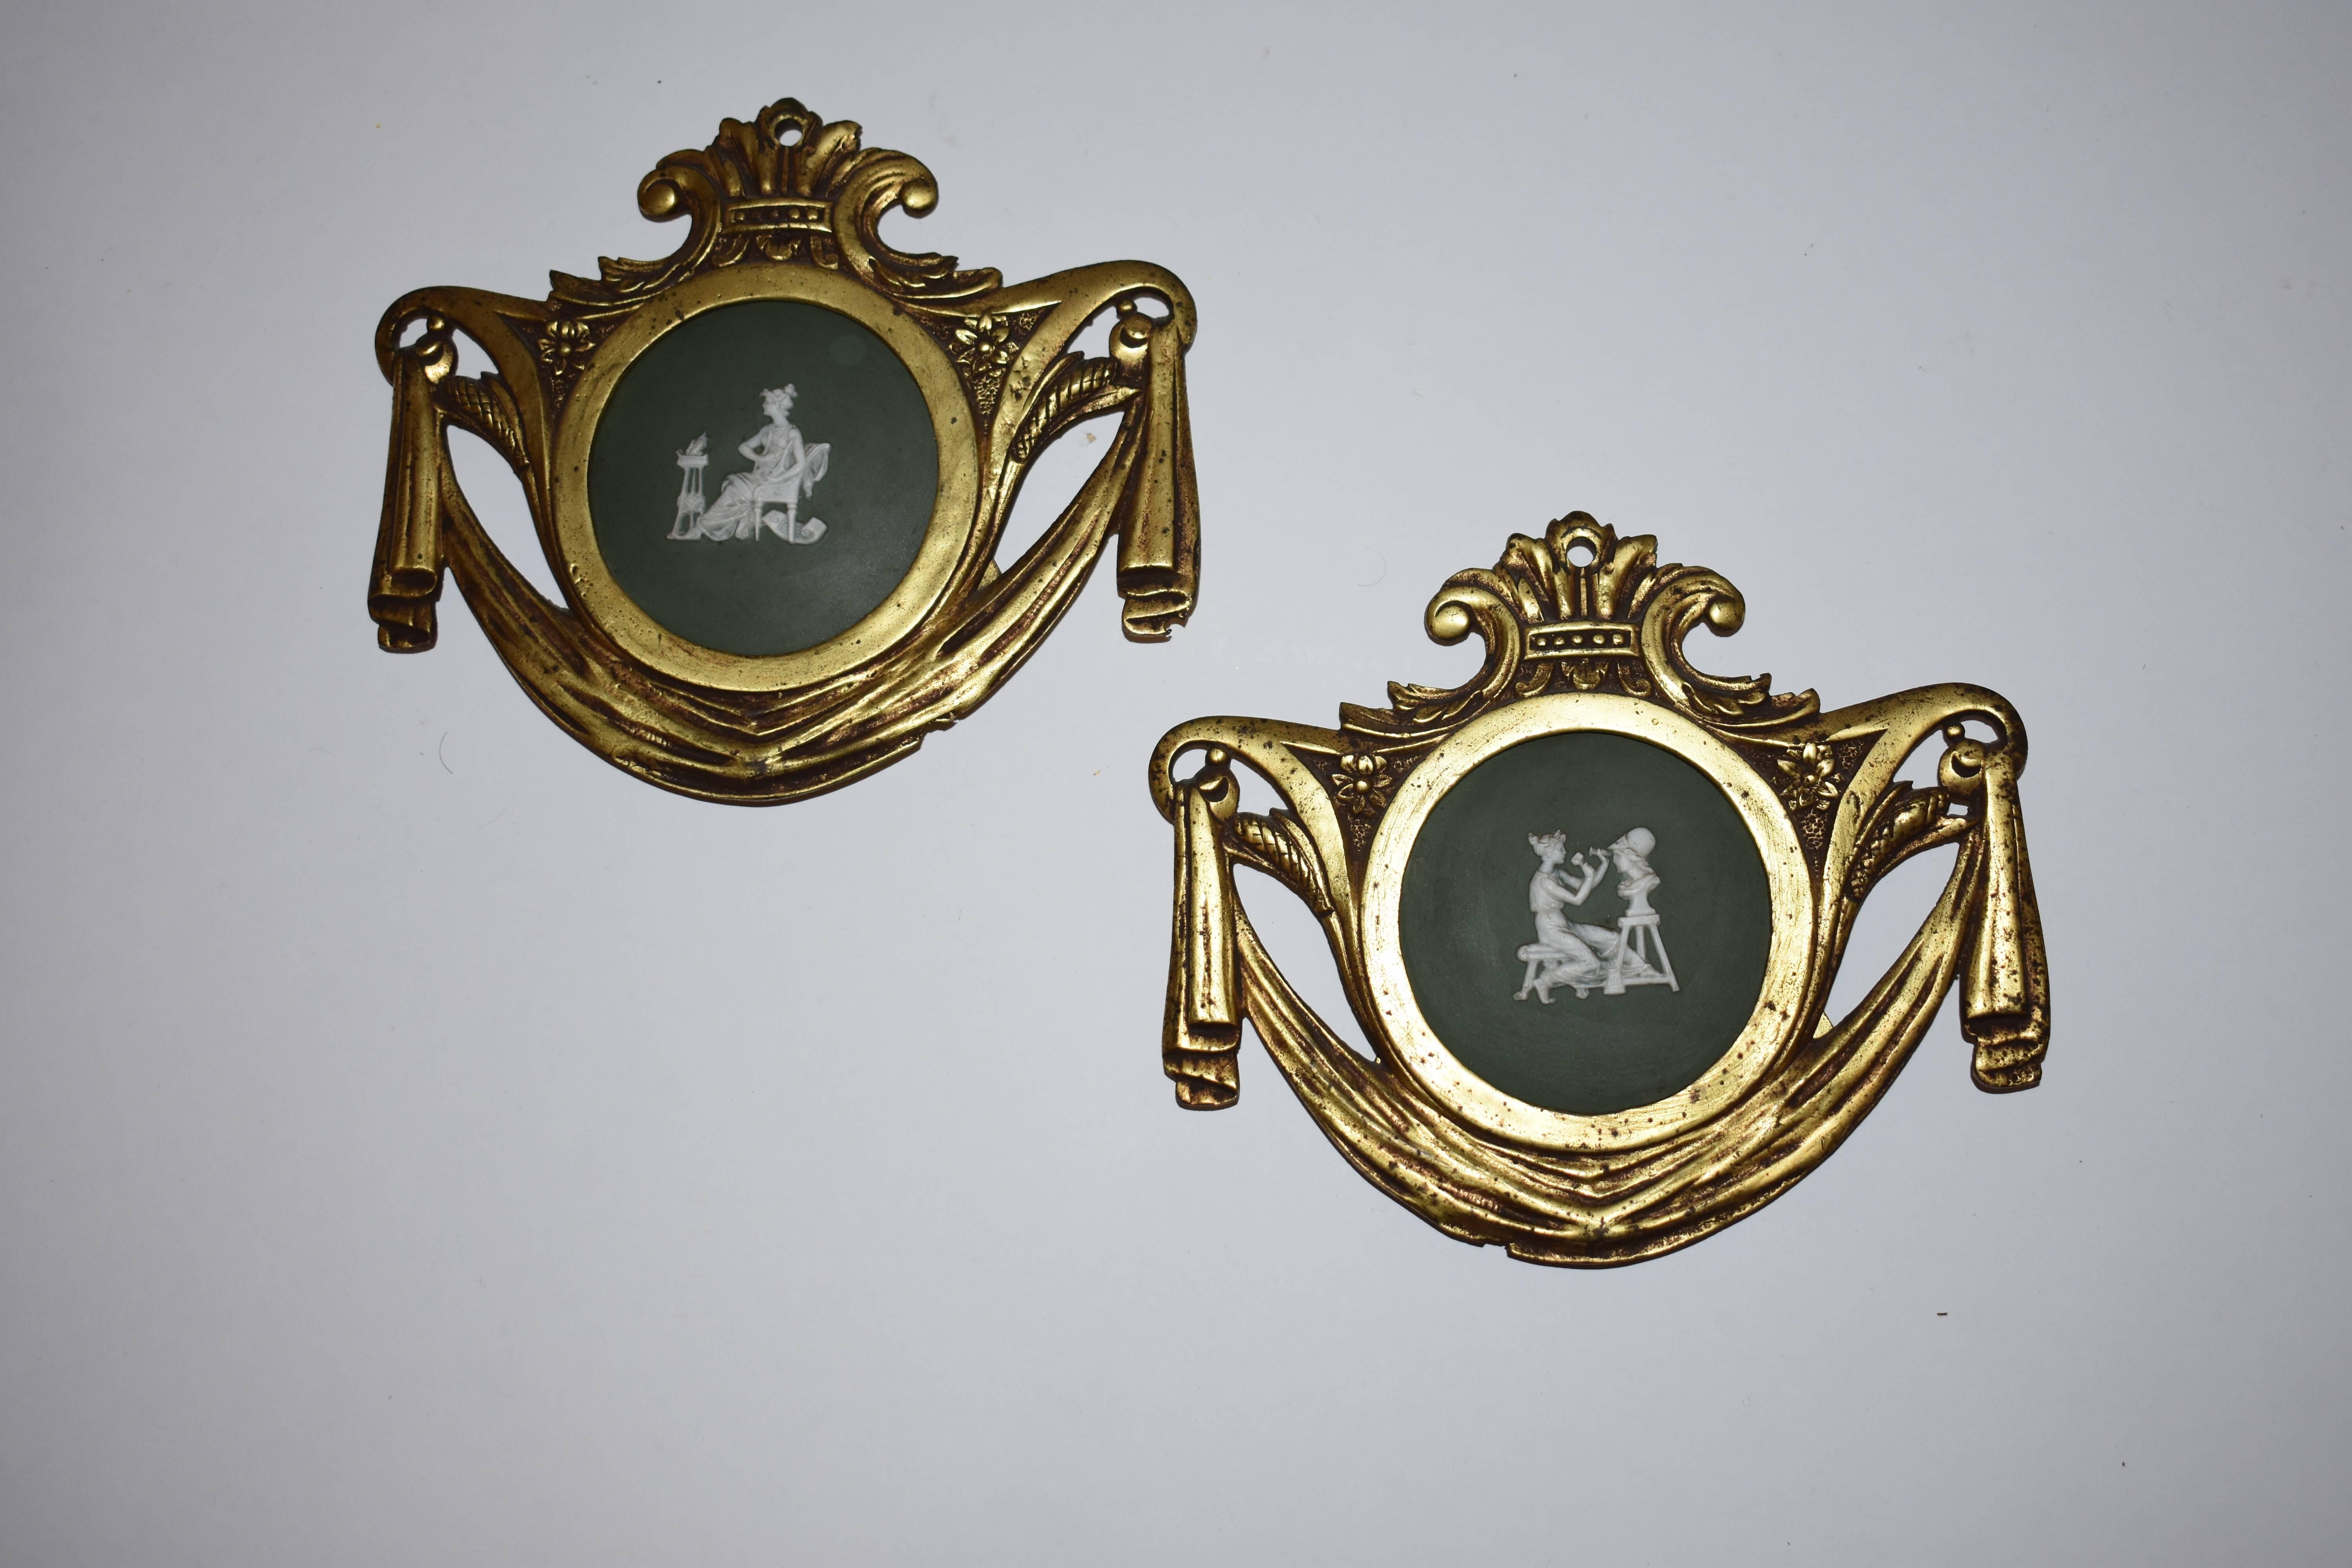 Neoclassical Revival Miniature Jasperware Ornament Plaques in the Style of Wedgwood